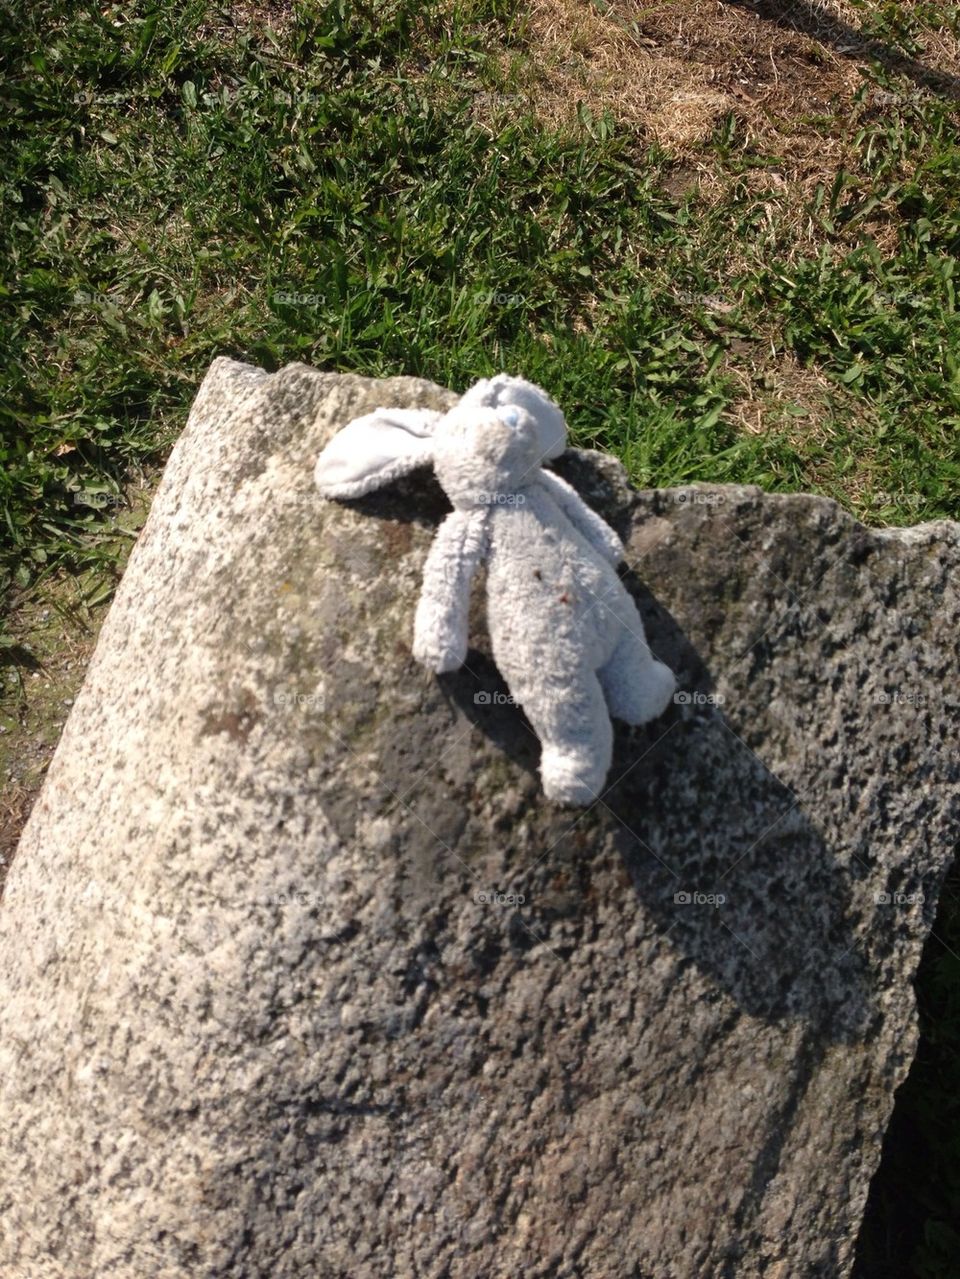 Cuddly toy laying on a stone